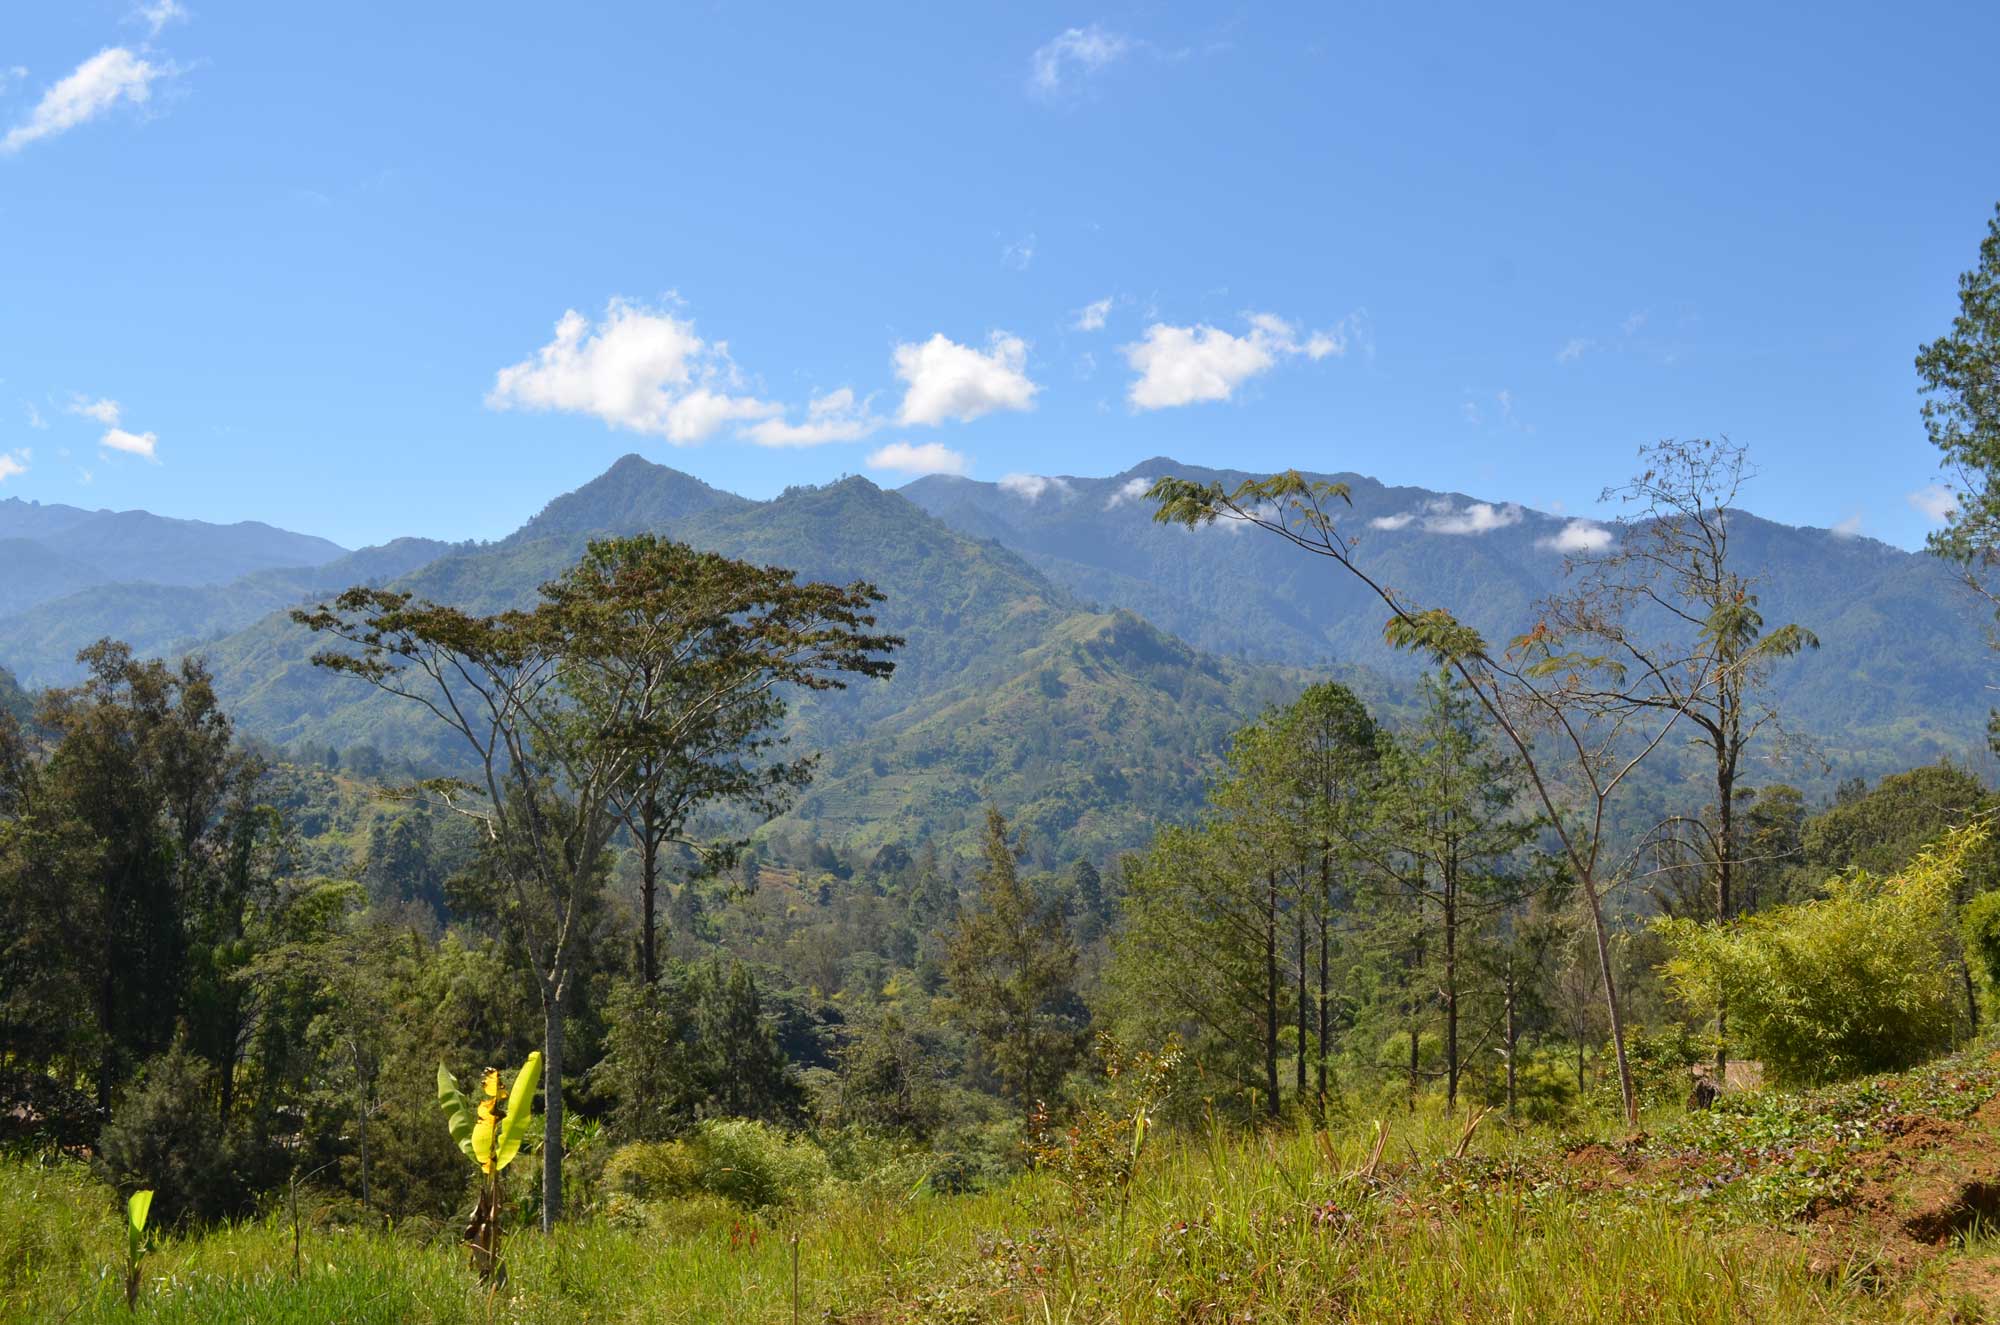 Photograph of the landscape of New Guinea. The photo shows a mountainous, forested landscape.